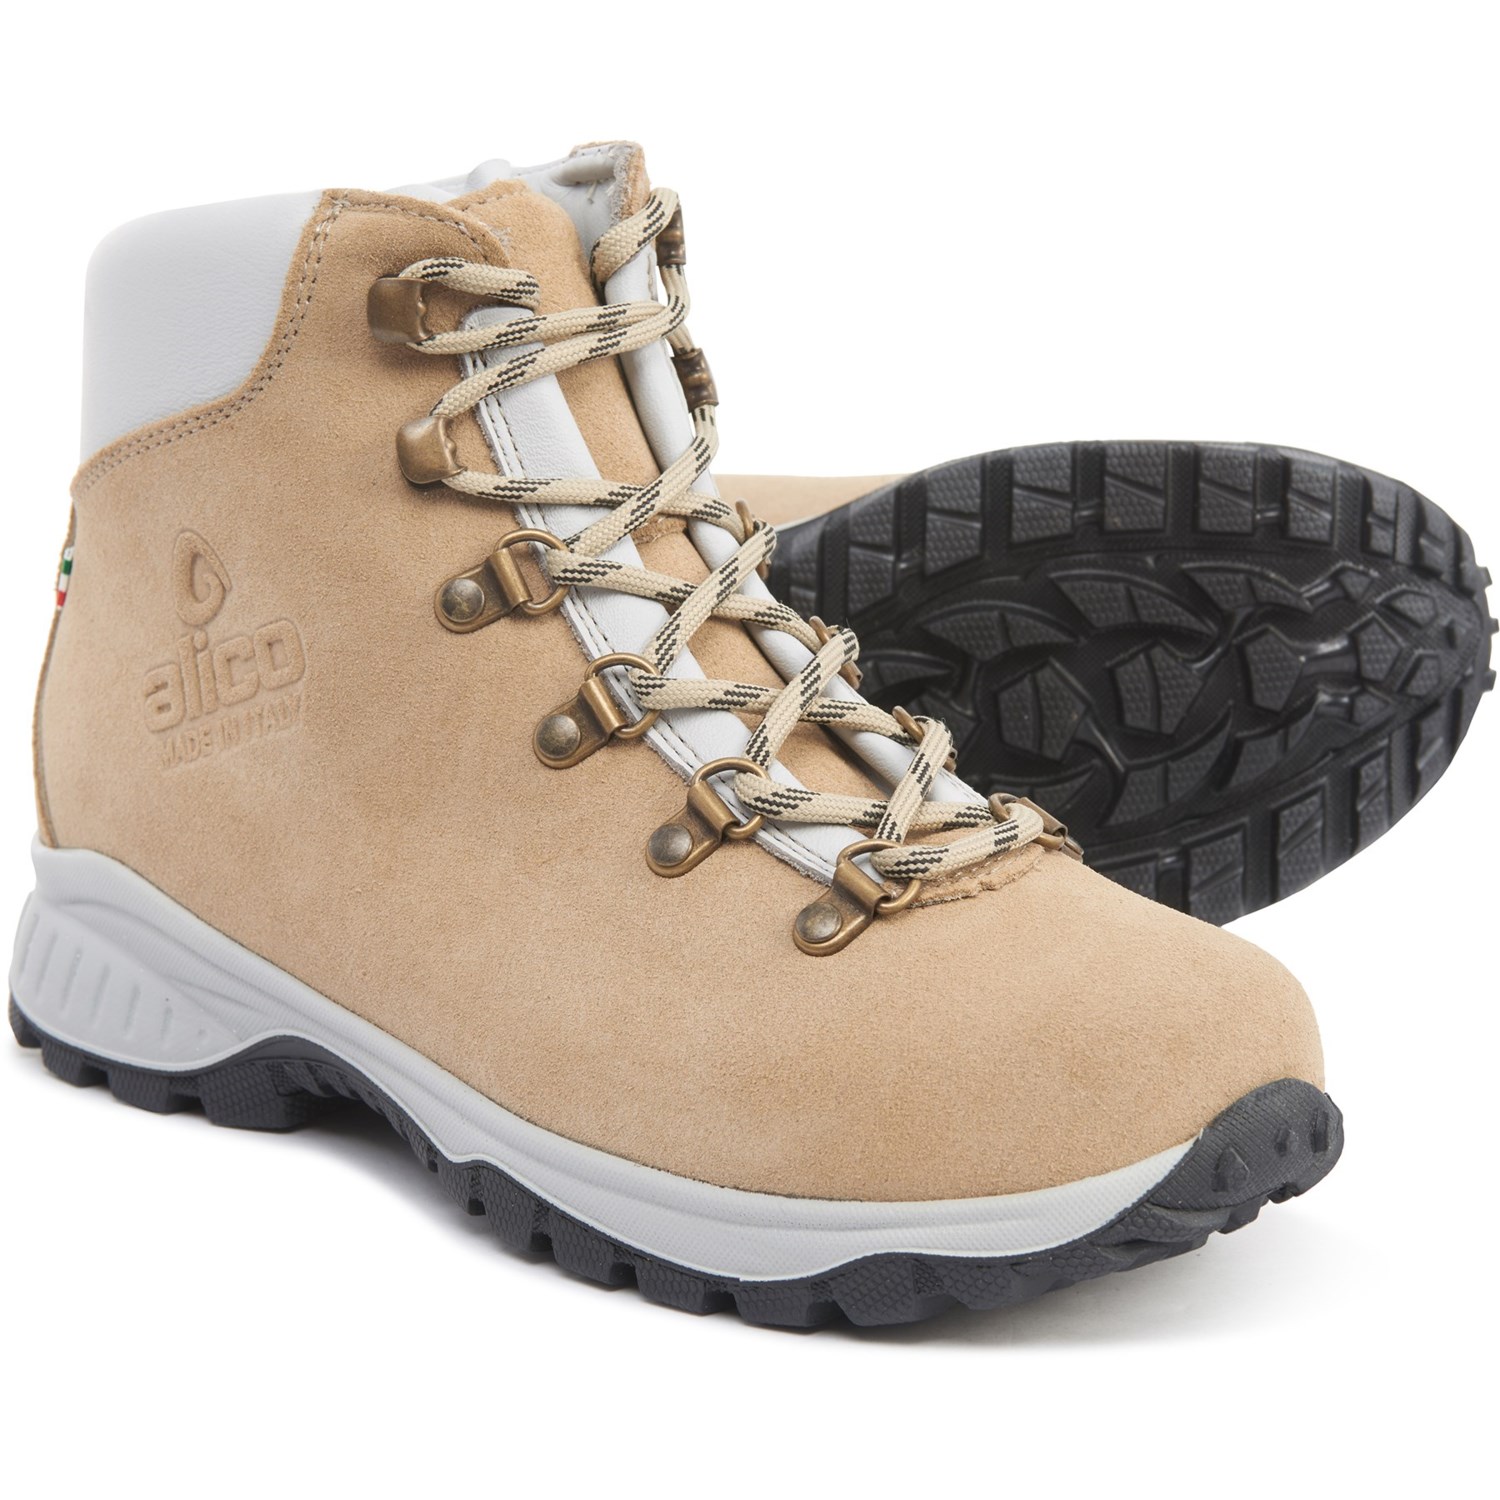 all leather hiking boots women's